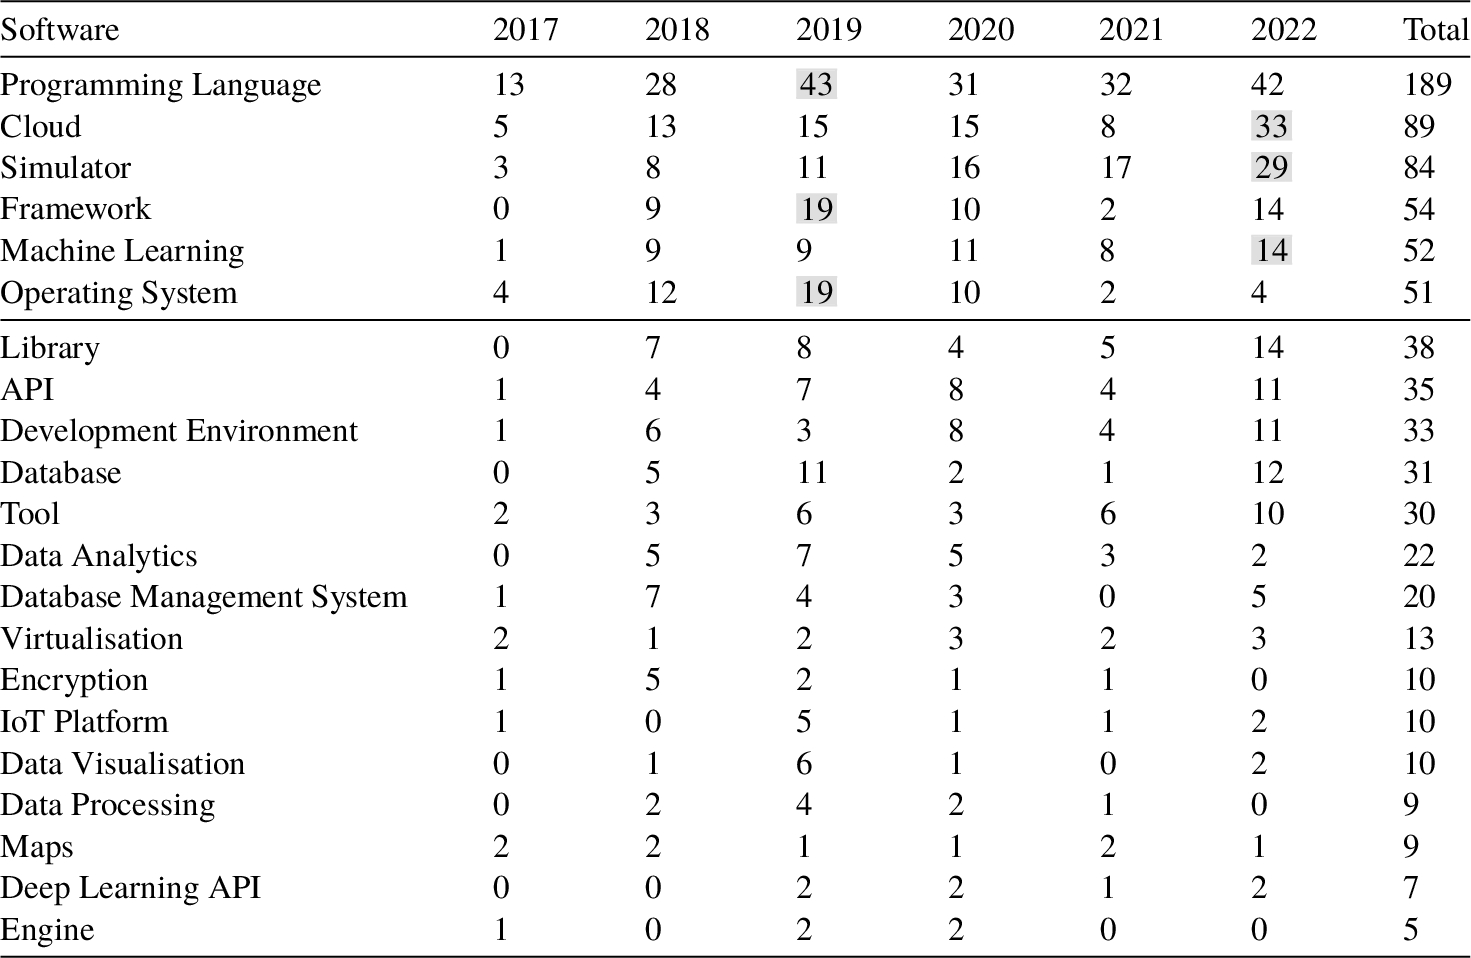 The number of articles that in 2017–2022 addressed a software in fog computing e-health applications.